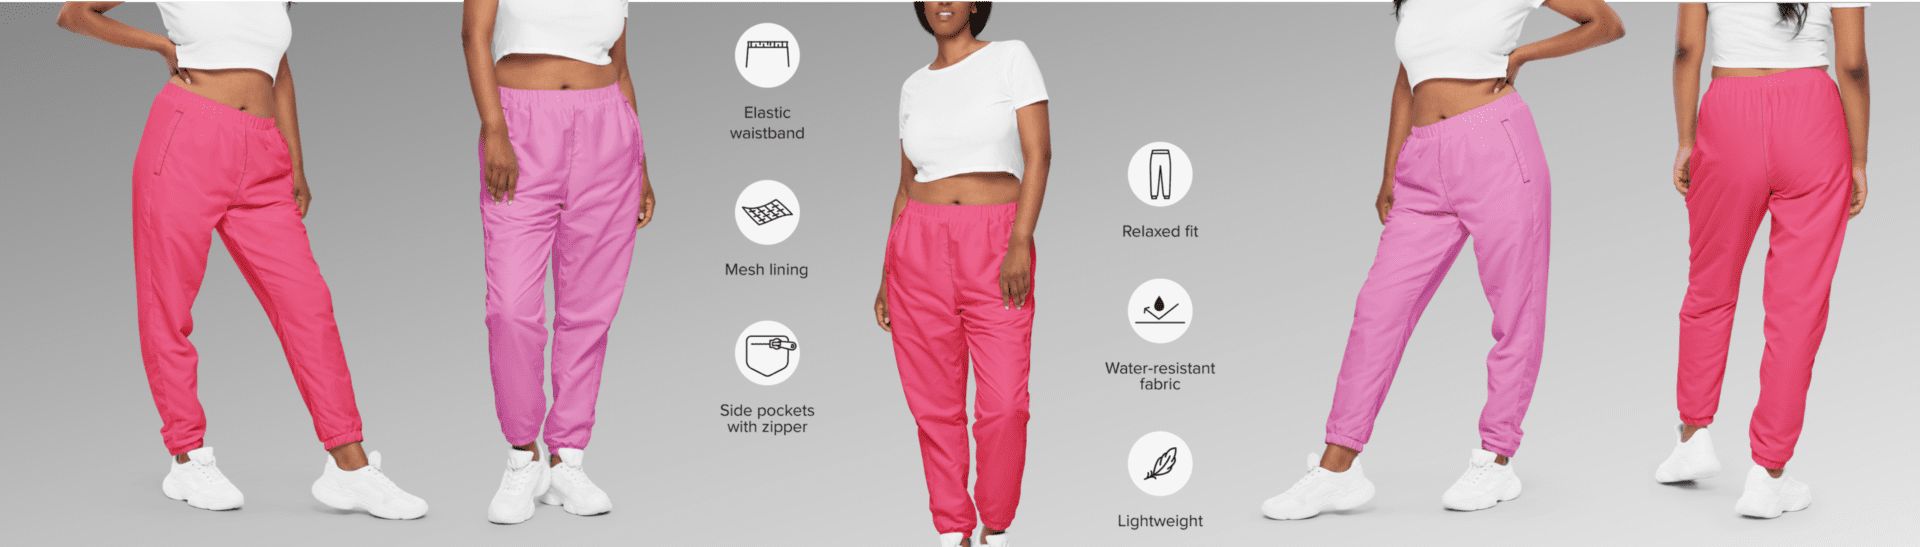 Pink relaxed fit women's sweatpants.